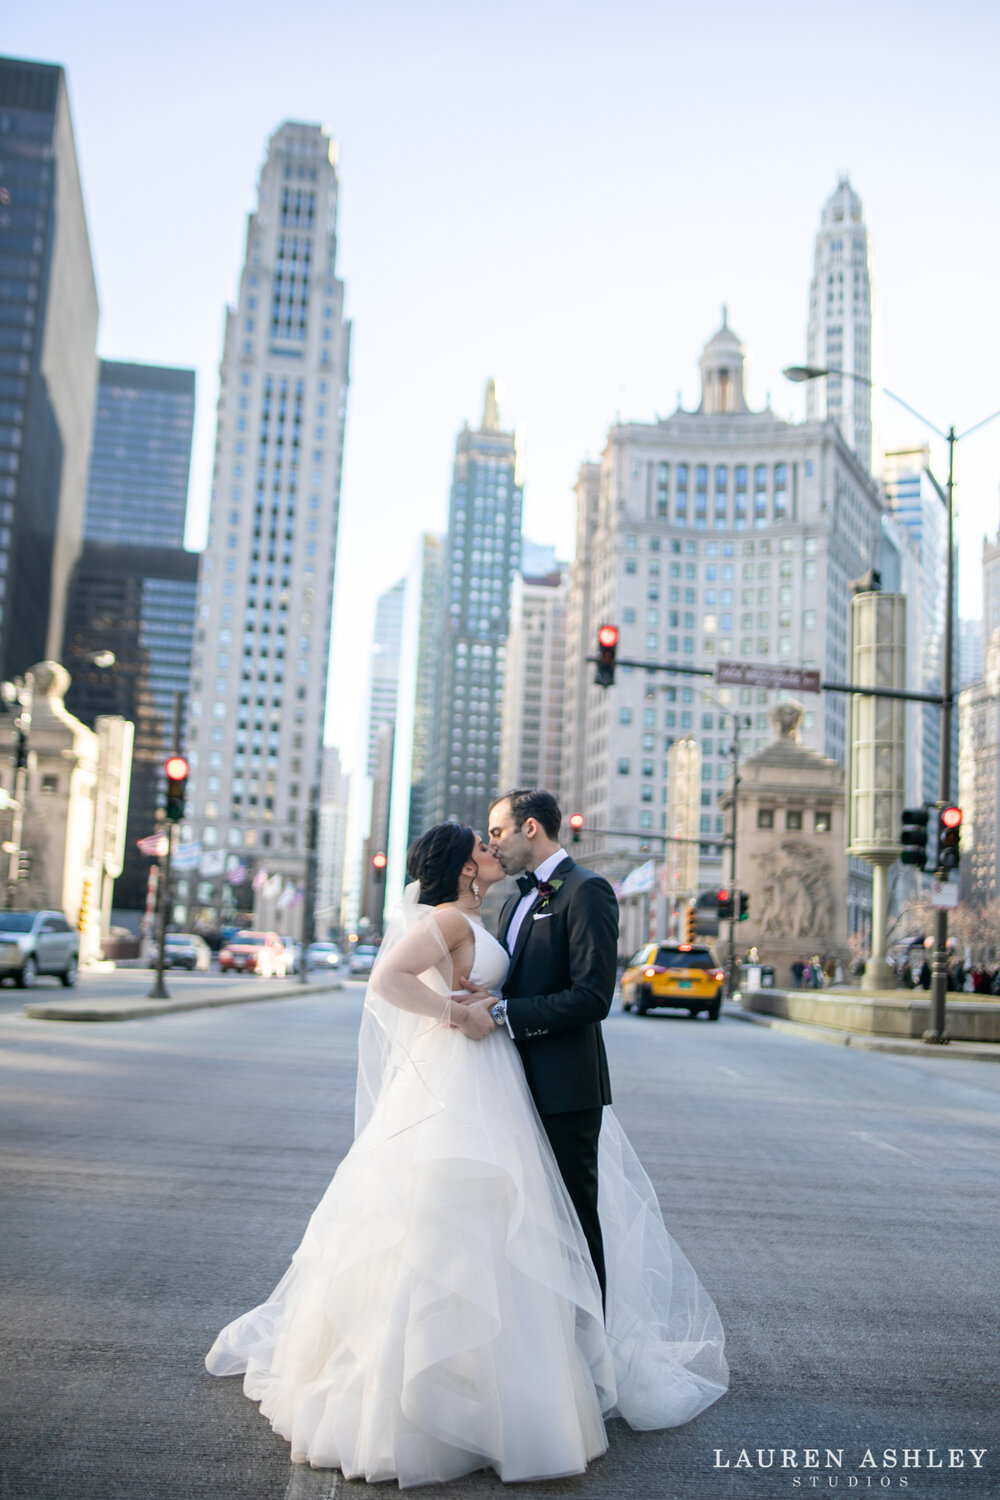 intercontinental-chicago-high-end-michigan-ave-magnificent-mile-wedding-chicago-wedding-photography-73.jpg